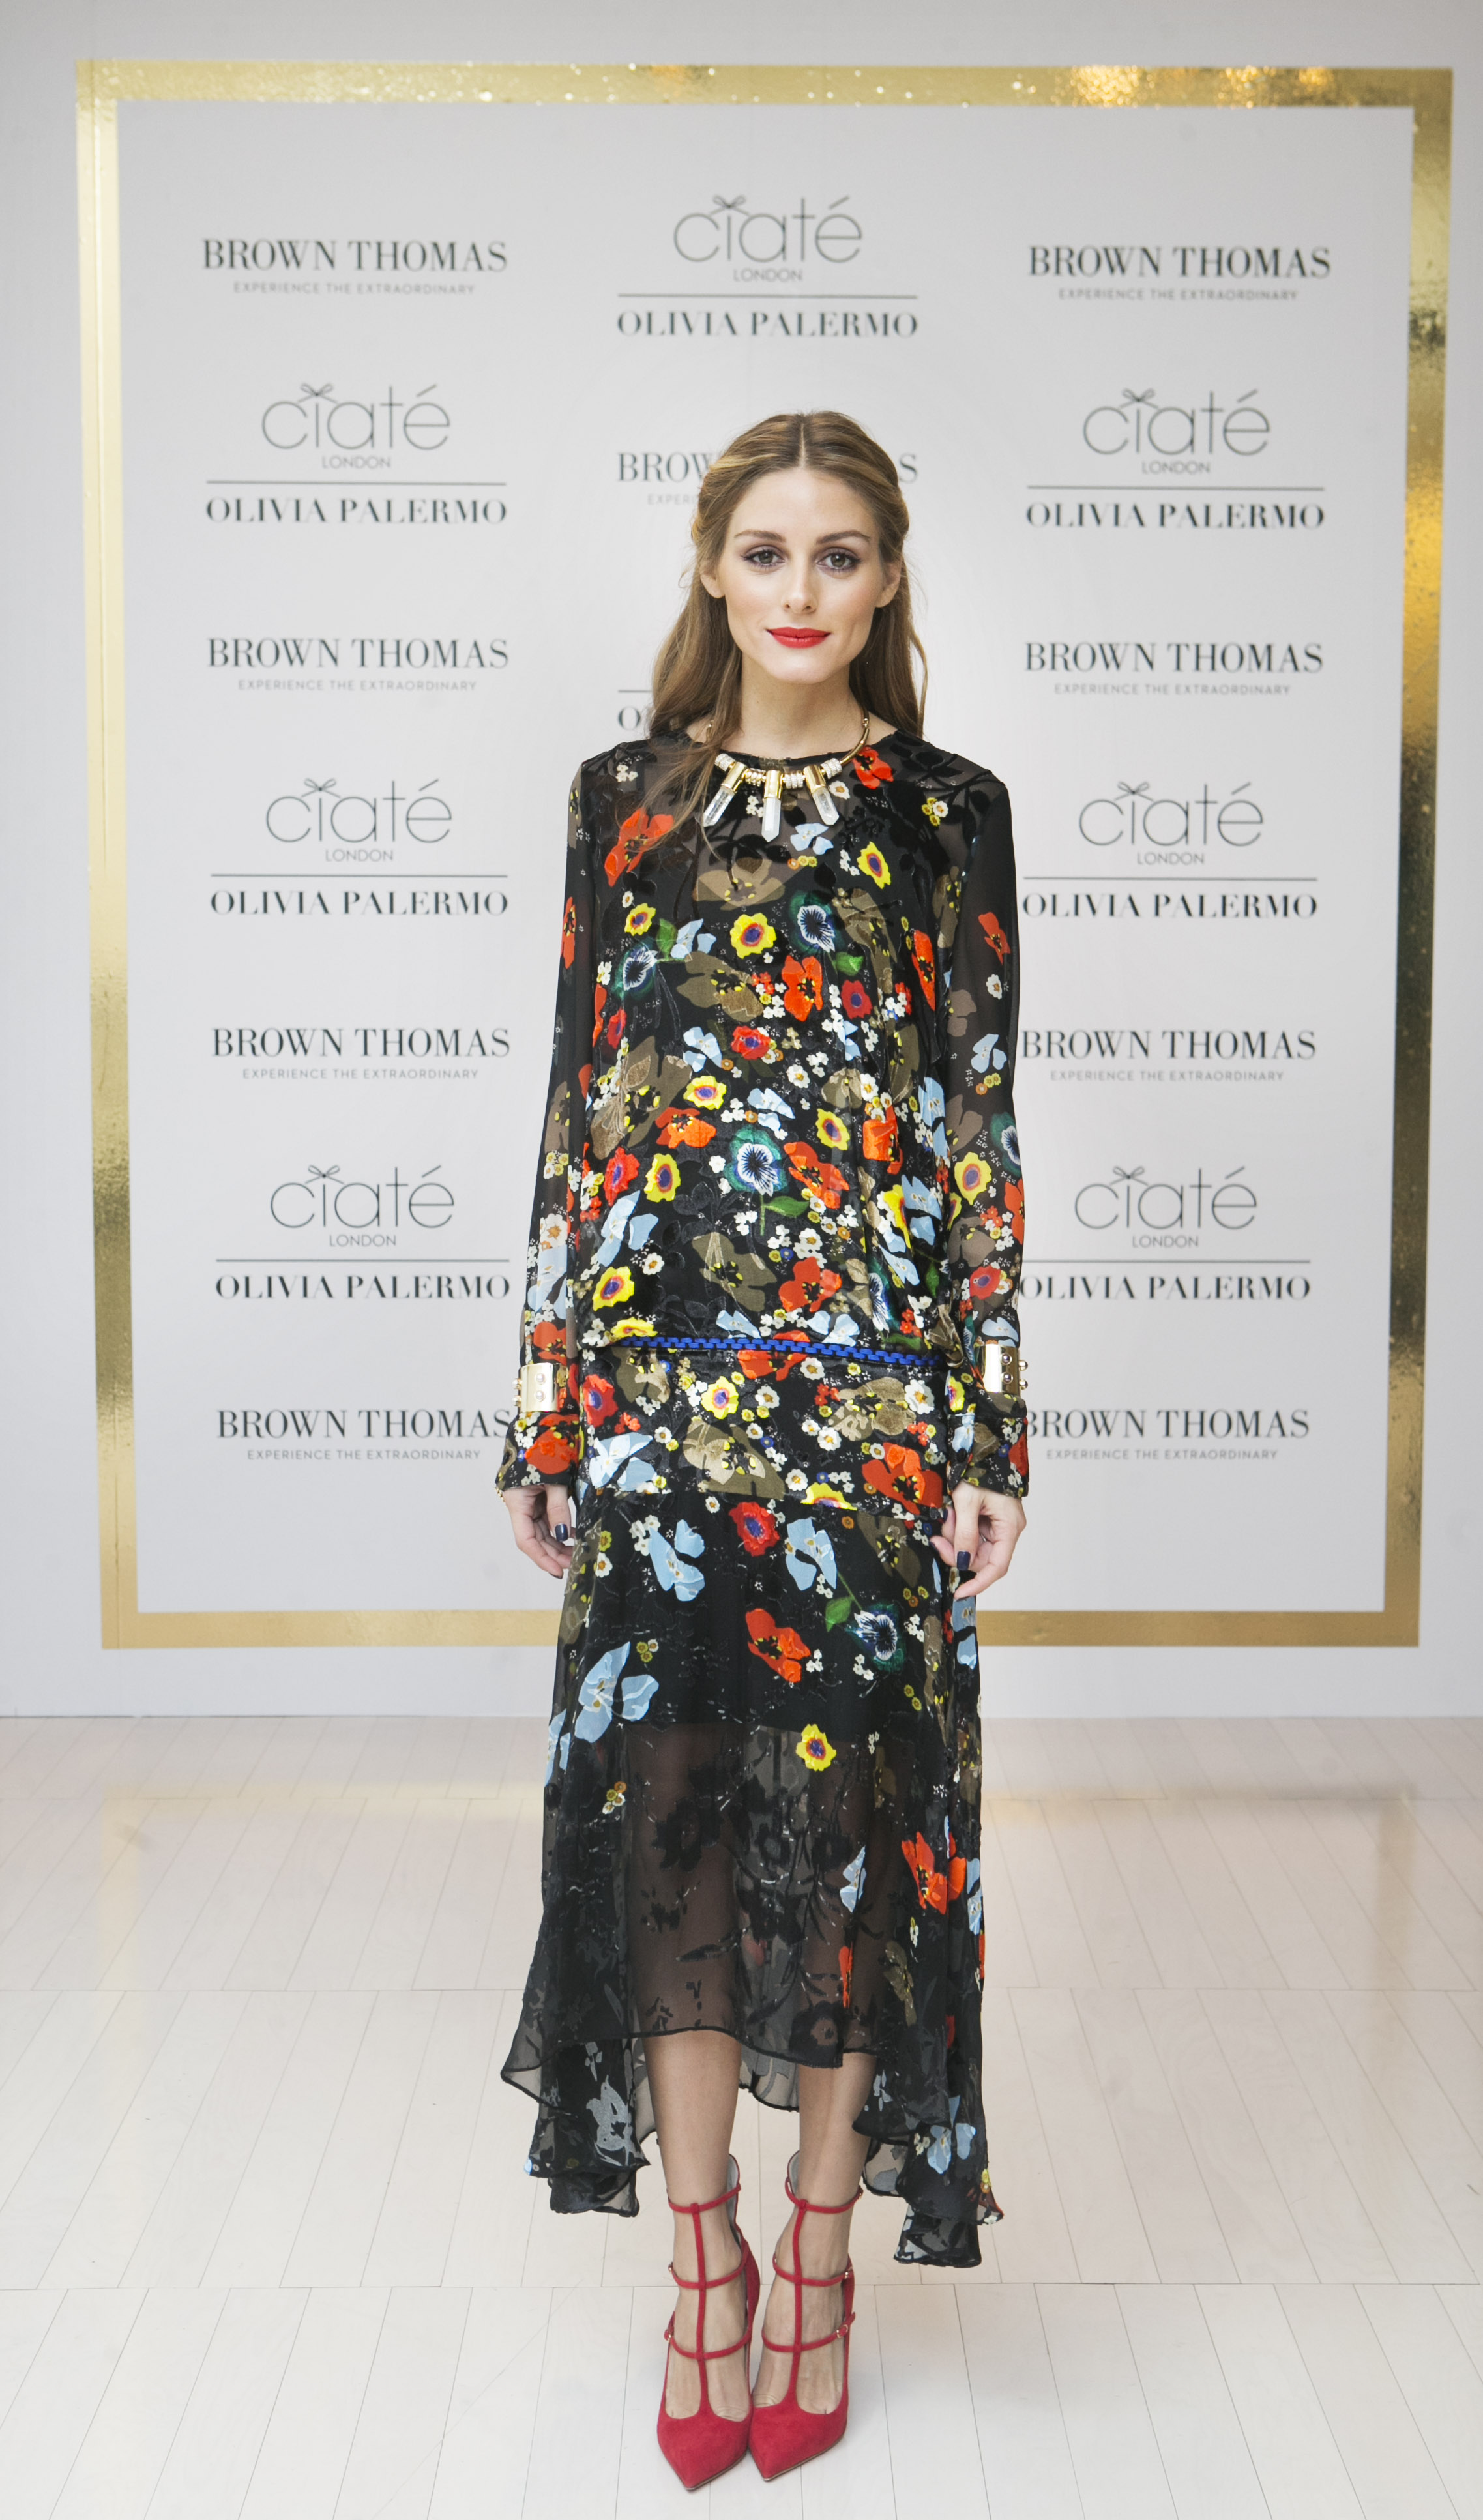 Olivia Palermo seen today launching her new range Ciaté London by Olivia Palermo at Brown Thomas on Dublin's Grafton Street. Olivia also took time to meet and greet fans. Ref: SPL1147846 091015 Picture by: Splash News Splash News and Pictures Los Angeles:310-821-2666 New York: 212-619-2666 London: 870-934-2666 photodesk@splashnews.com 